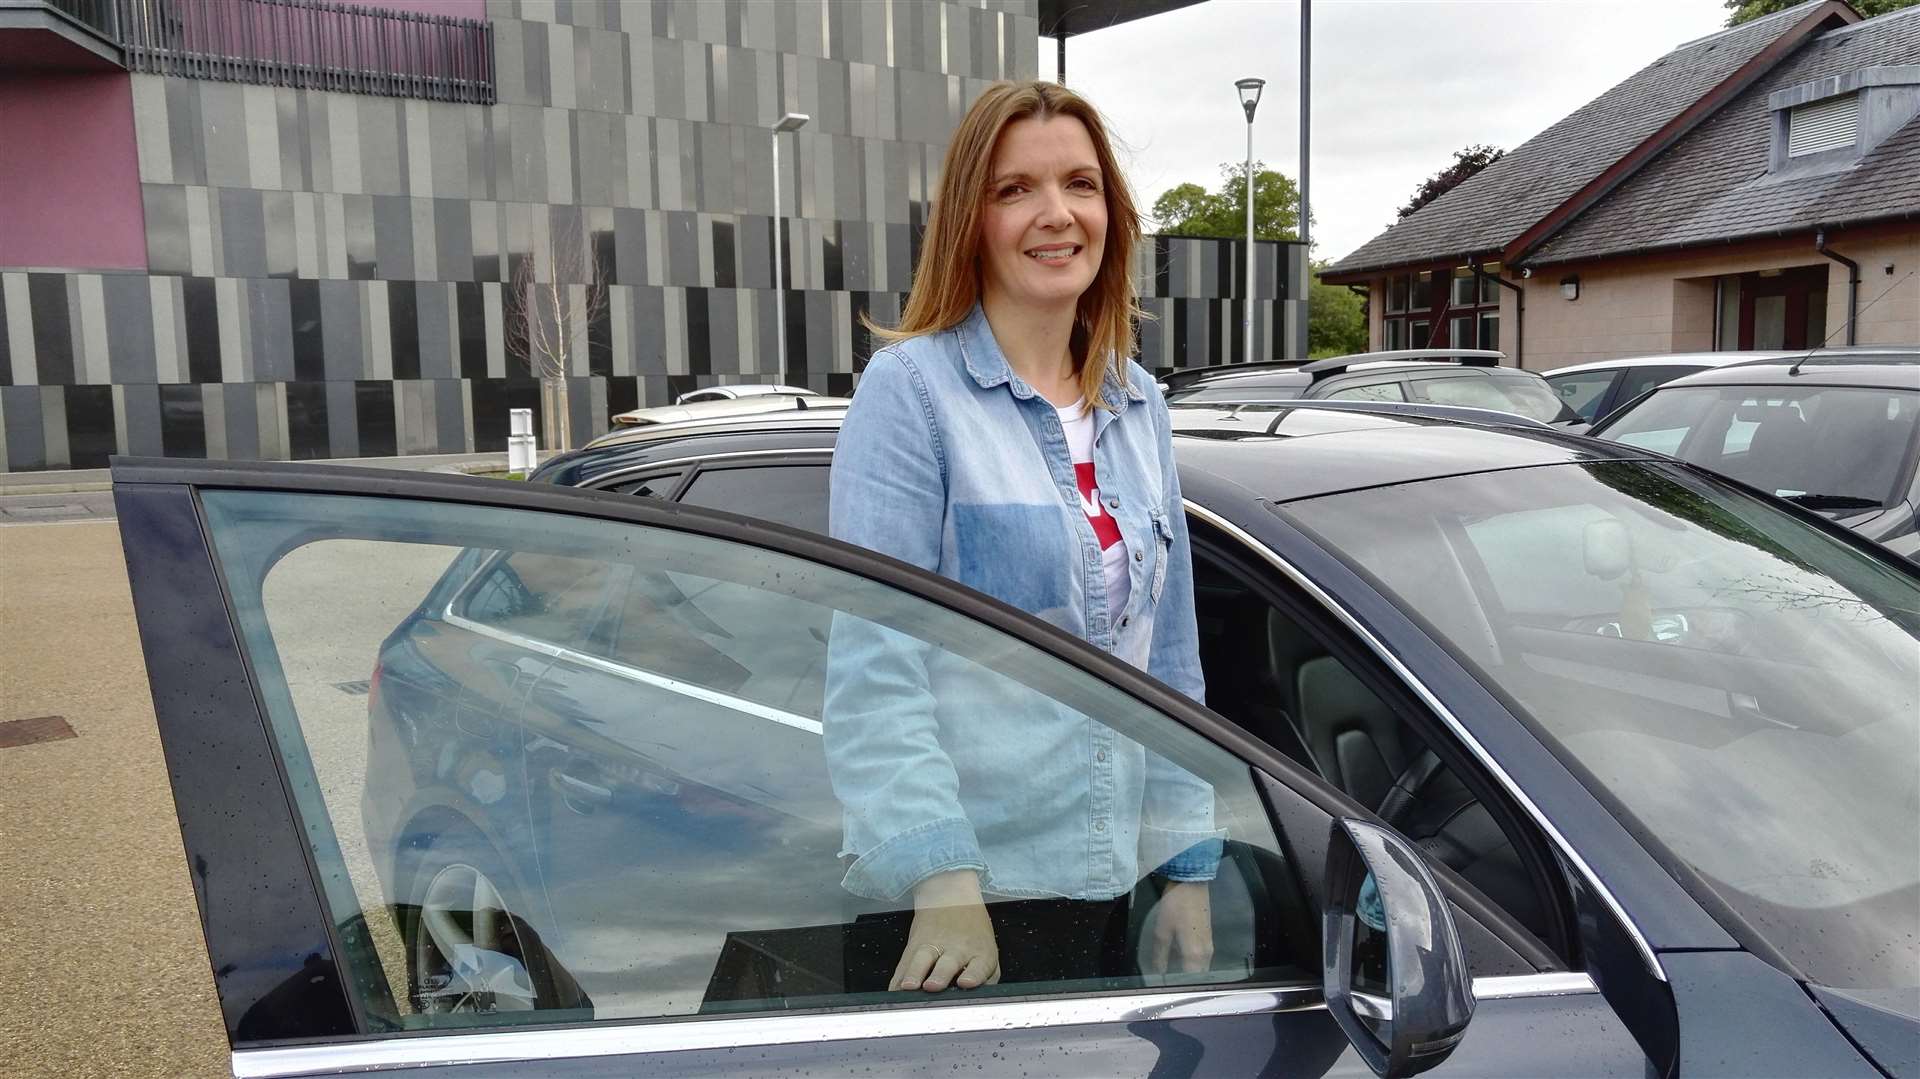 Suzanne Mackay who is a volunteer patient driver for the partnership between Highland Hospice and Highland Home Carers,